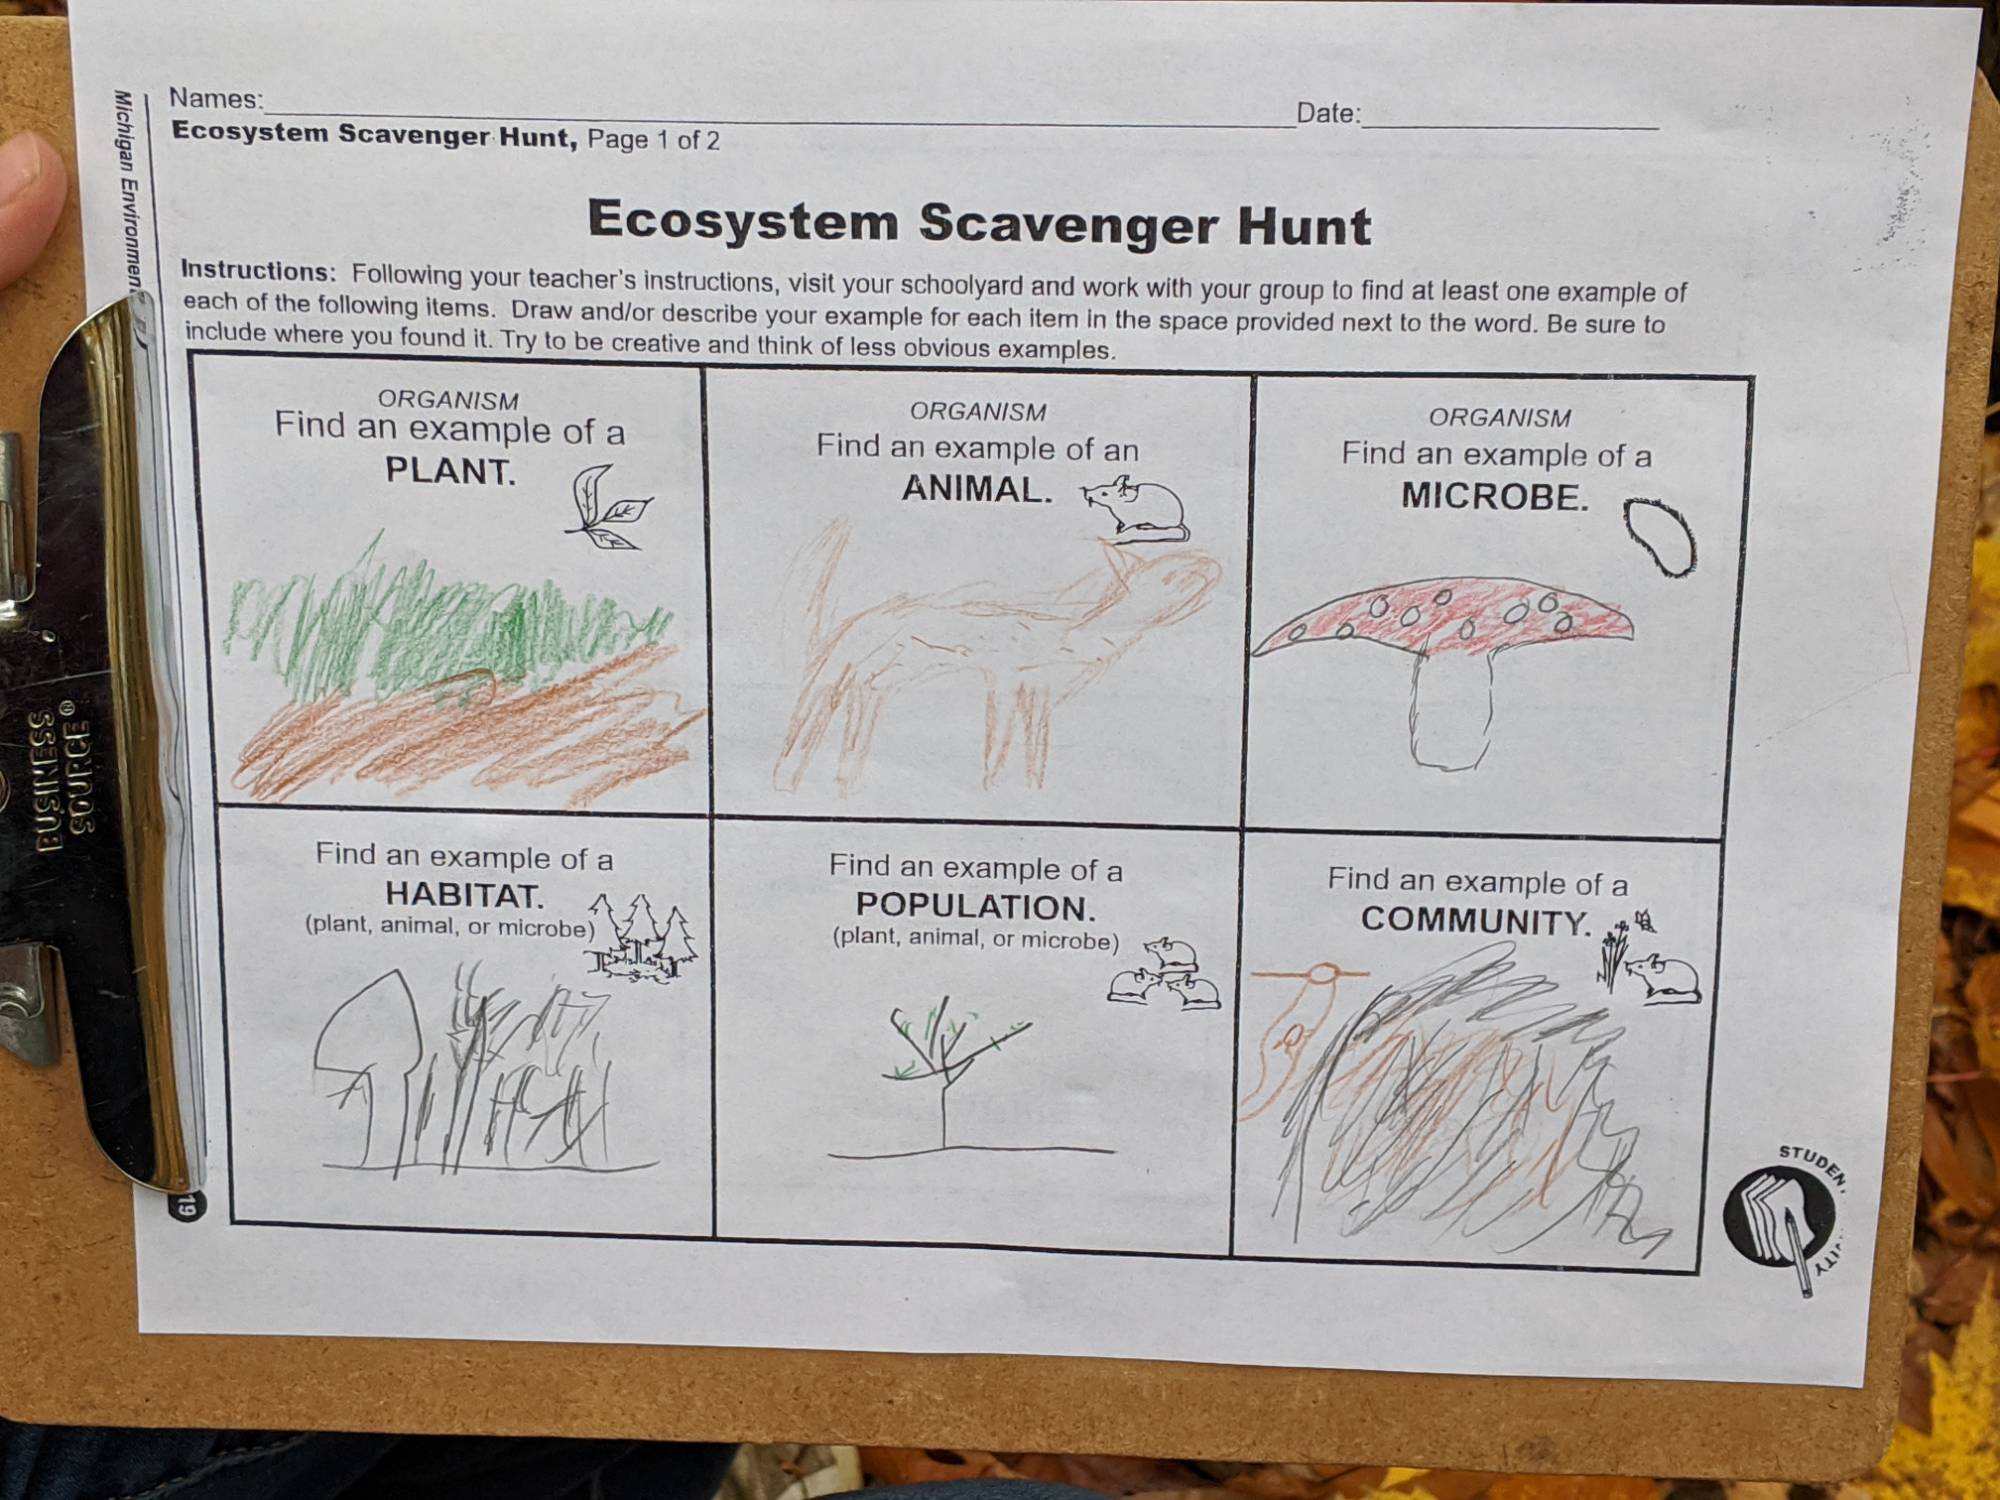 Ecosystem scavenger hunt - grid with student drawings